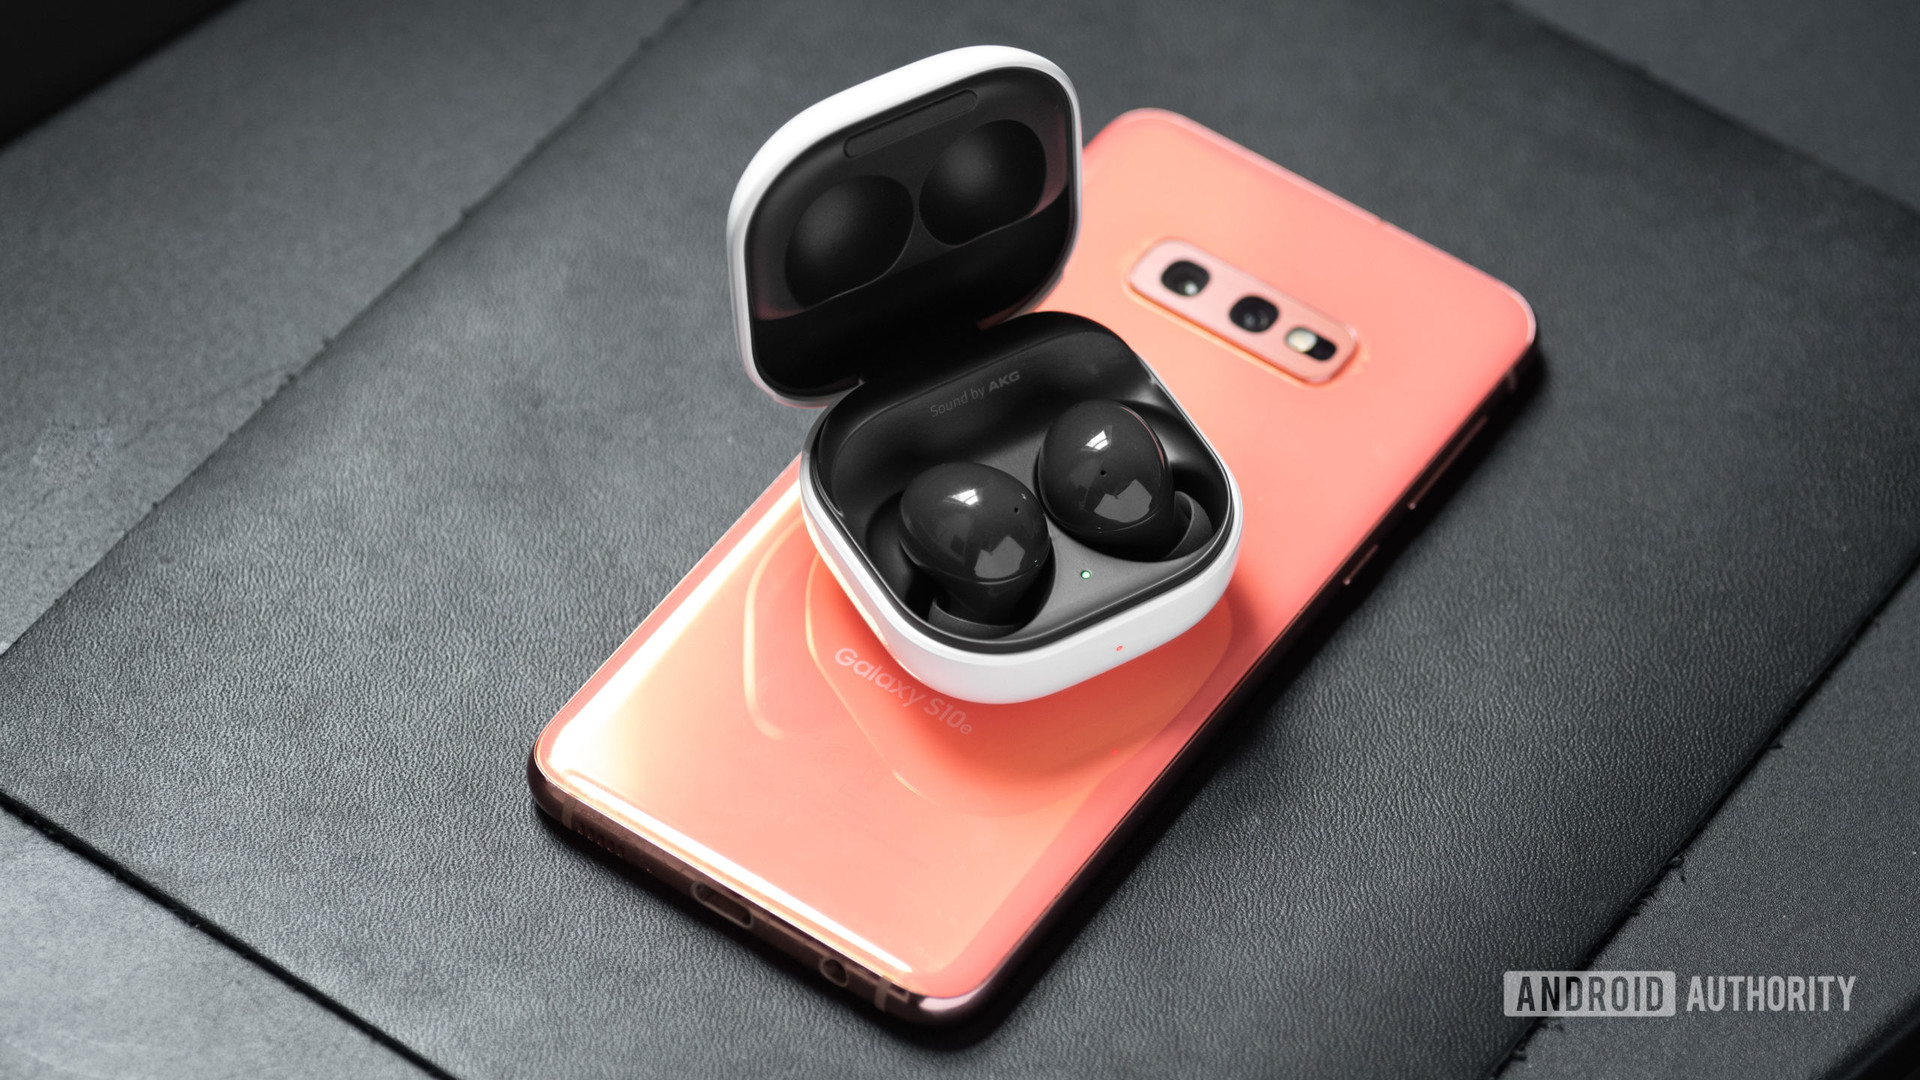 The Samsung Galaxy Buds 2 noise cancelling true wireless earphones in the open charging case on top of a Samsung Galaxy S10e smartphone in pink.